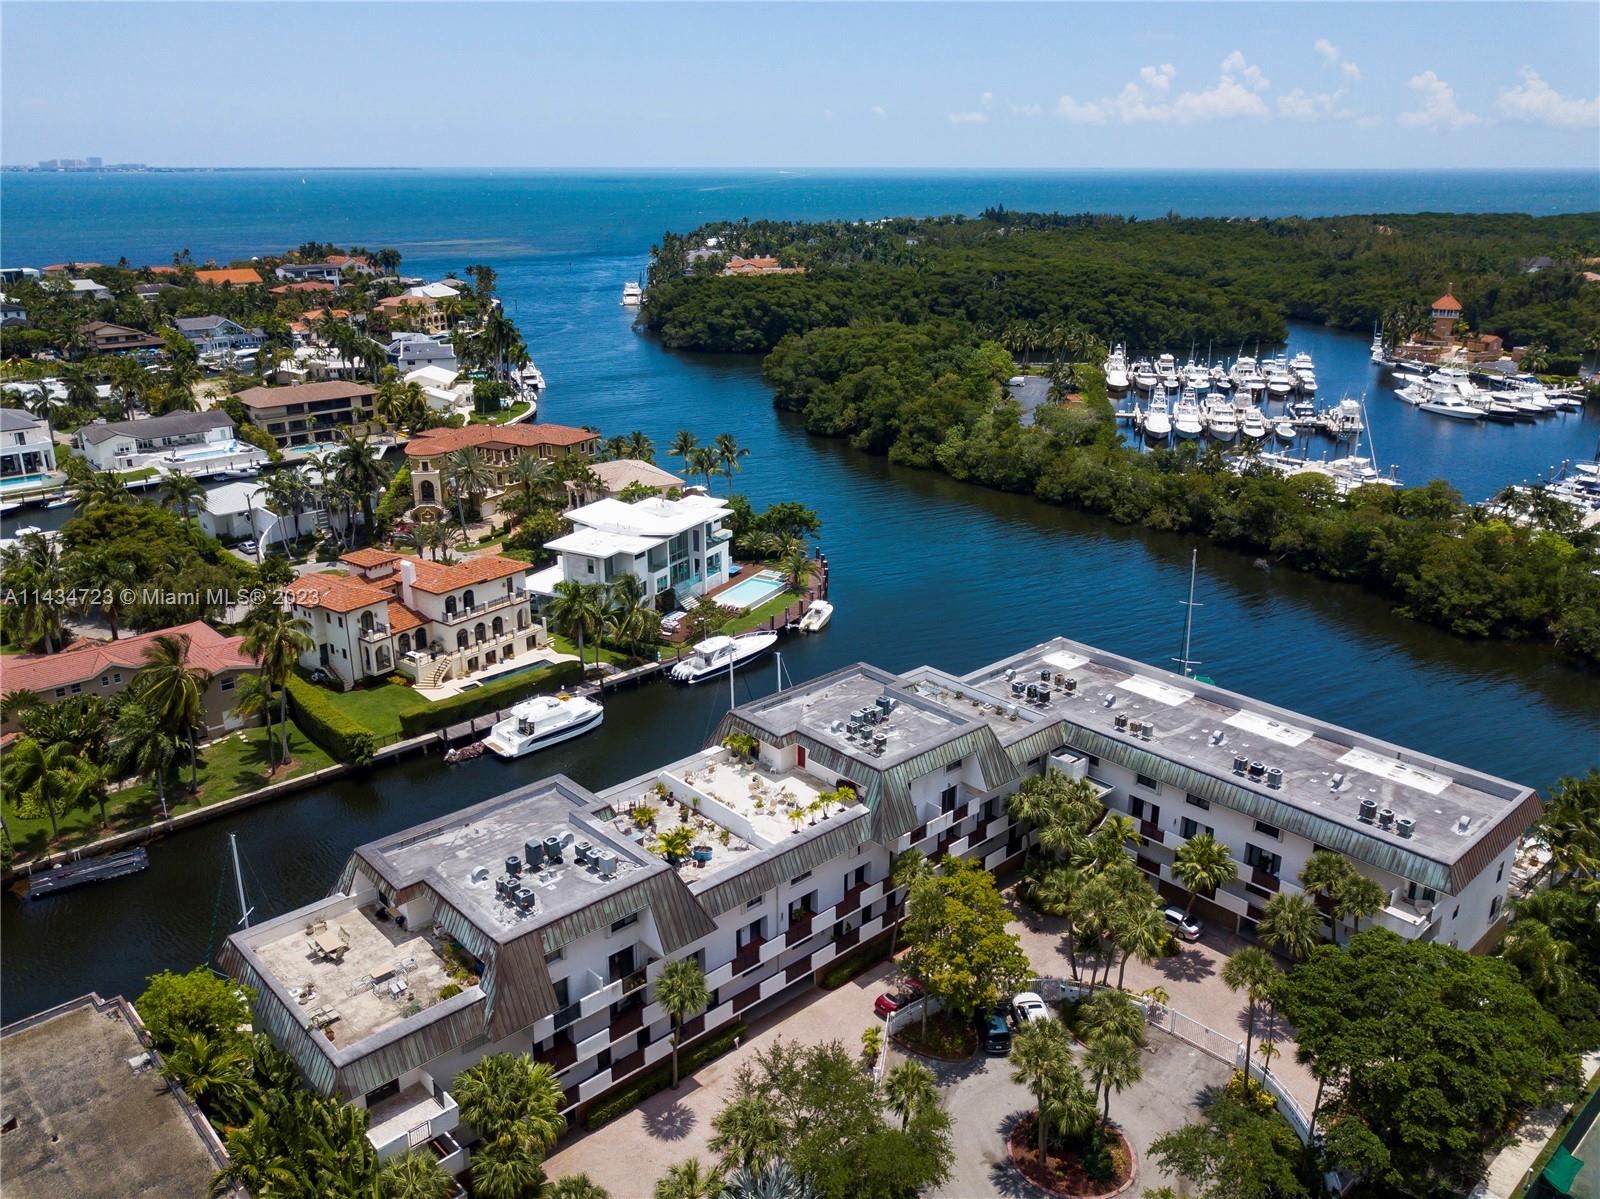 A hidden gem awaits at the crossroads where Coral Gables, Coconut Grove, and Biscayne Bay intersect. This remodeled three-story unit in the understated Gables Harbour provides waterfront living, making sunrise greetings a possibility from your balconies or your private rooftop terrace. Rooftop terrace is a unique feature with plenty of room to gather, dine, & enjoy morning coffee or evening cocktails alike! For boating enthusiasts, the allure continues with a 40’ boat-slip, offering direct access to the azure waters of Biscayne Bay—no bridges!  The unit features plenty of storage, formal & informal living spaces, updated bathrooms, spacious laundry room, & hurricane protection. Gated security, waterfront pool, covered parking space, & an enviable location make this a Very Special Home.